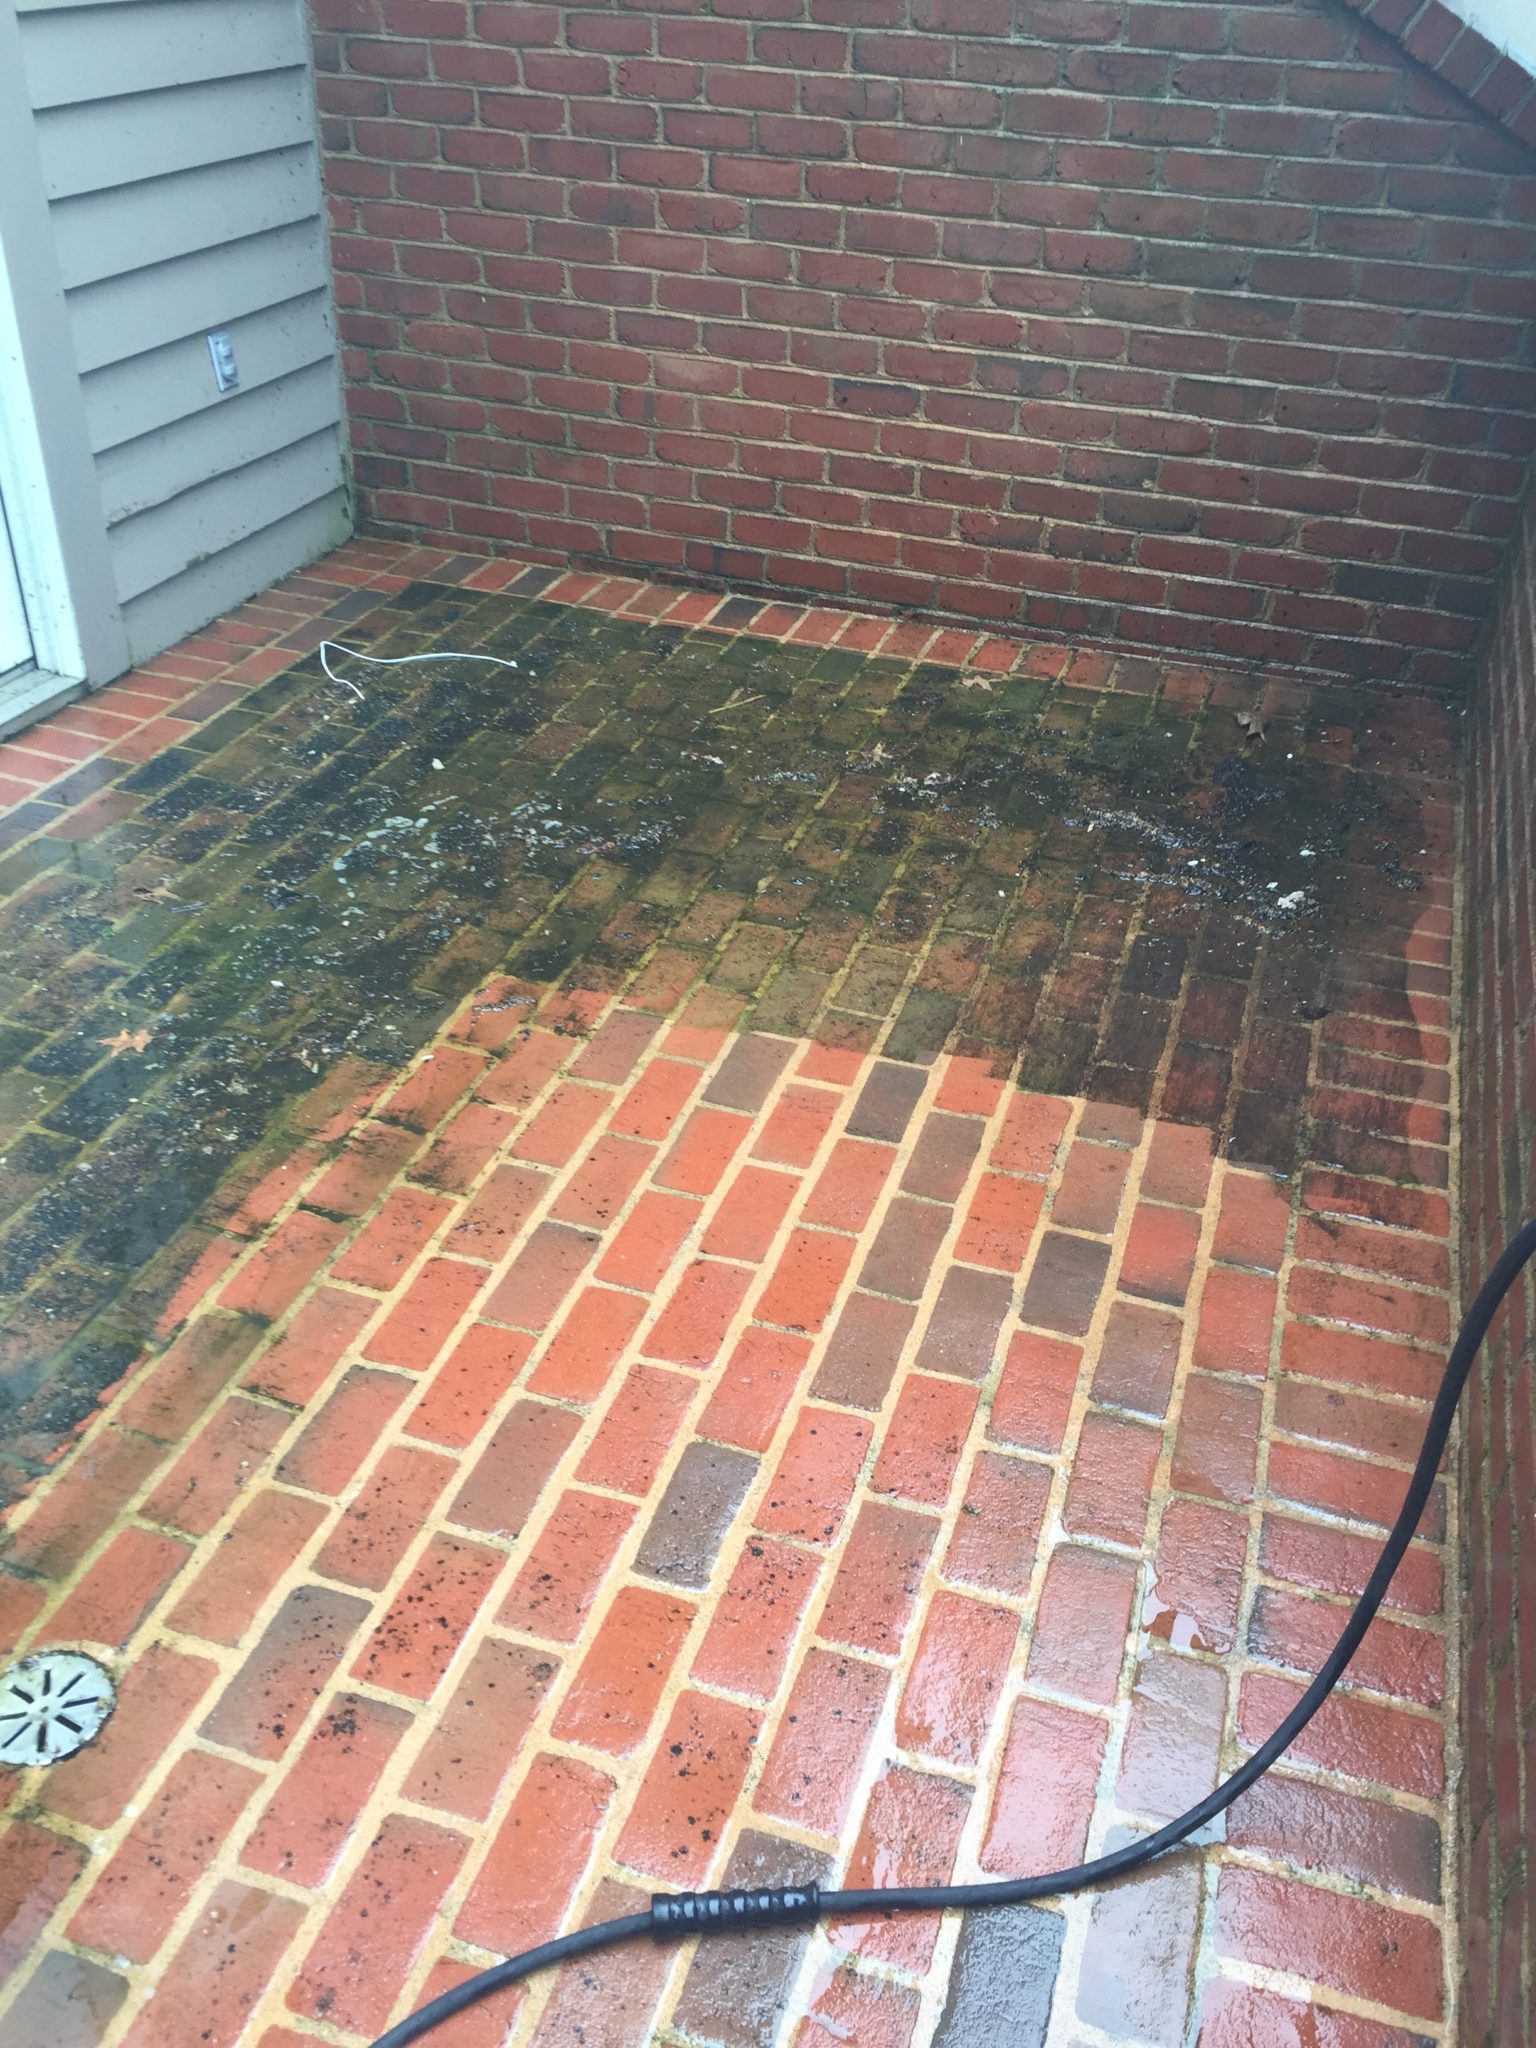 patio paver cleaning power brick washing driveway remove estimate